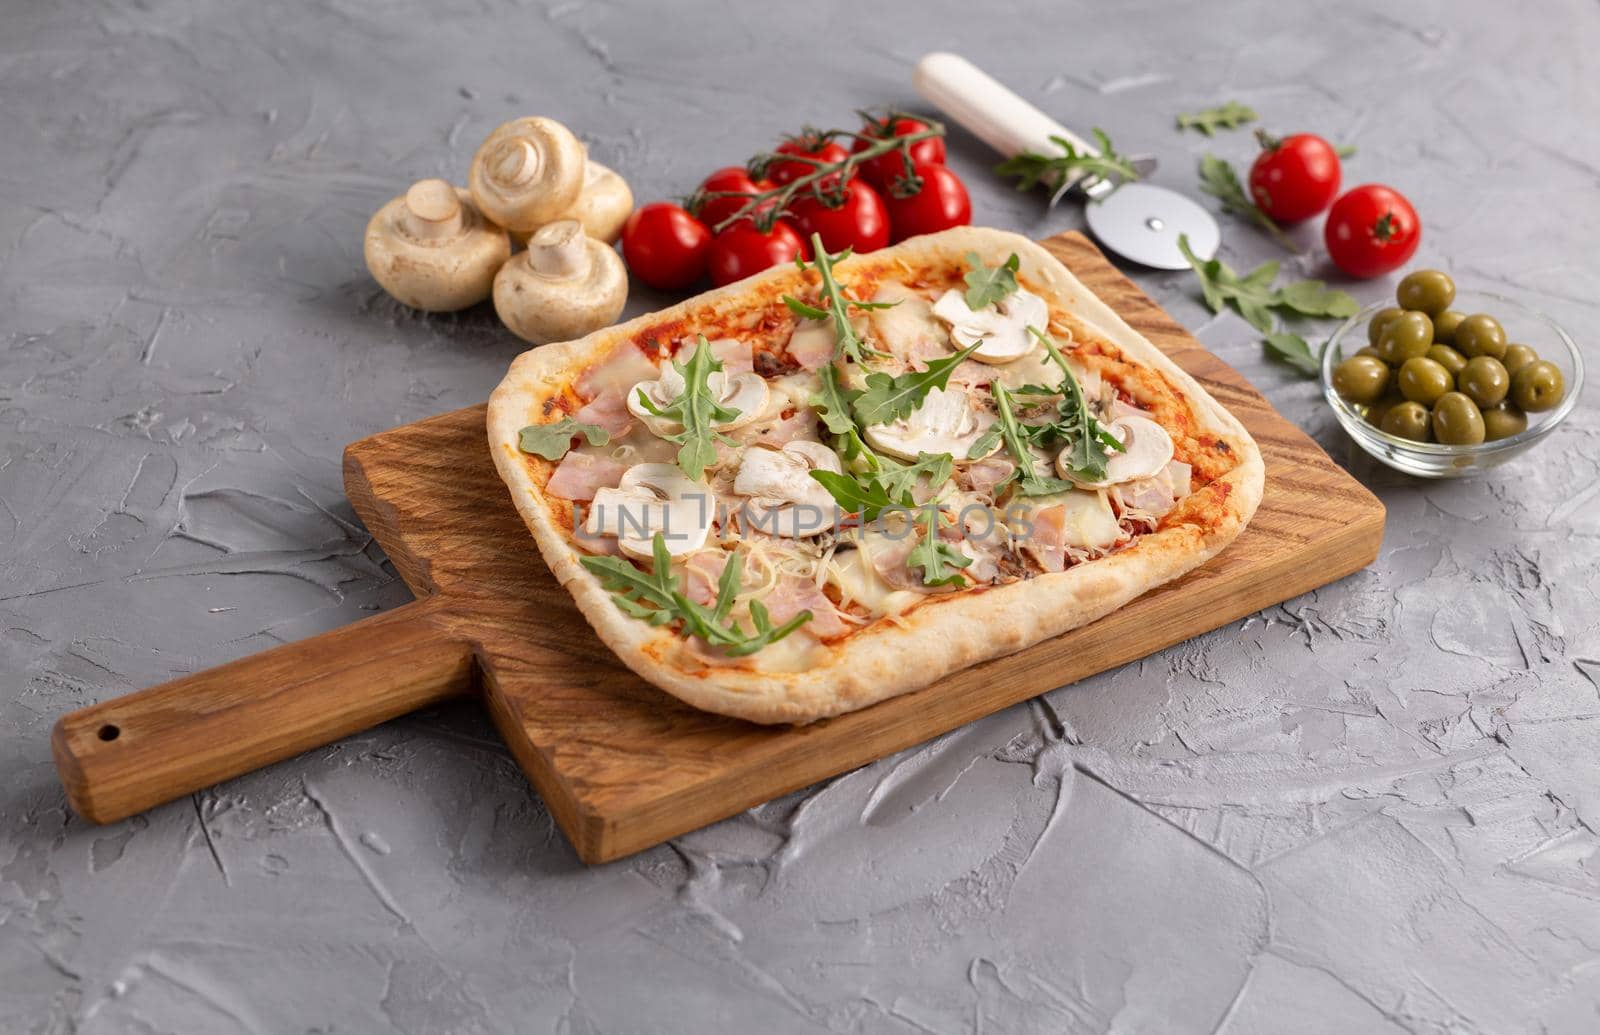 Rectangular pizza with mushrooms, tomatoes and arugula on a wooden cutting board by Satura86